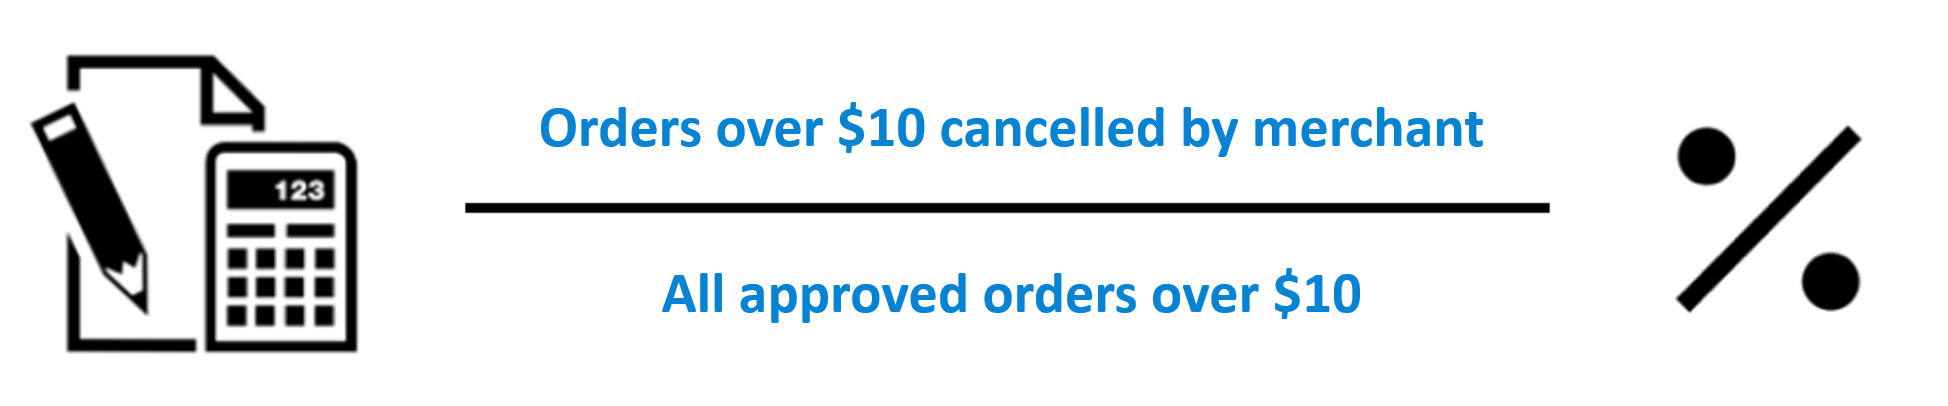 cancellation_rate_for_orders_over_10_dollars_EN.png